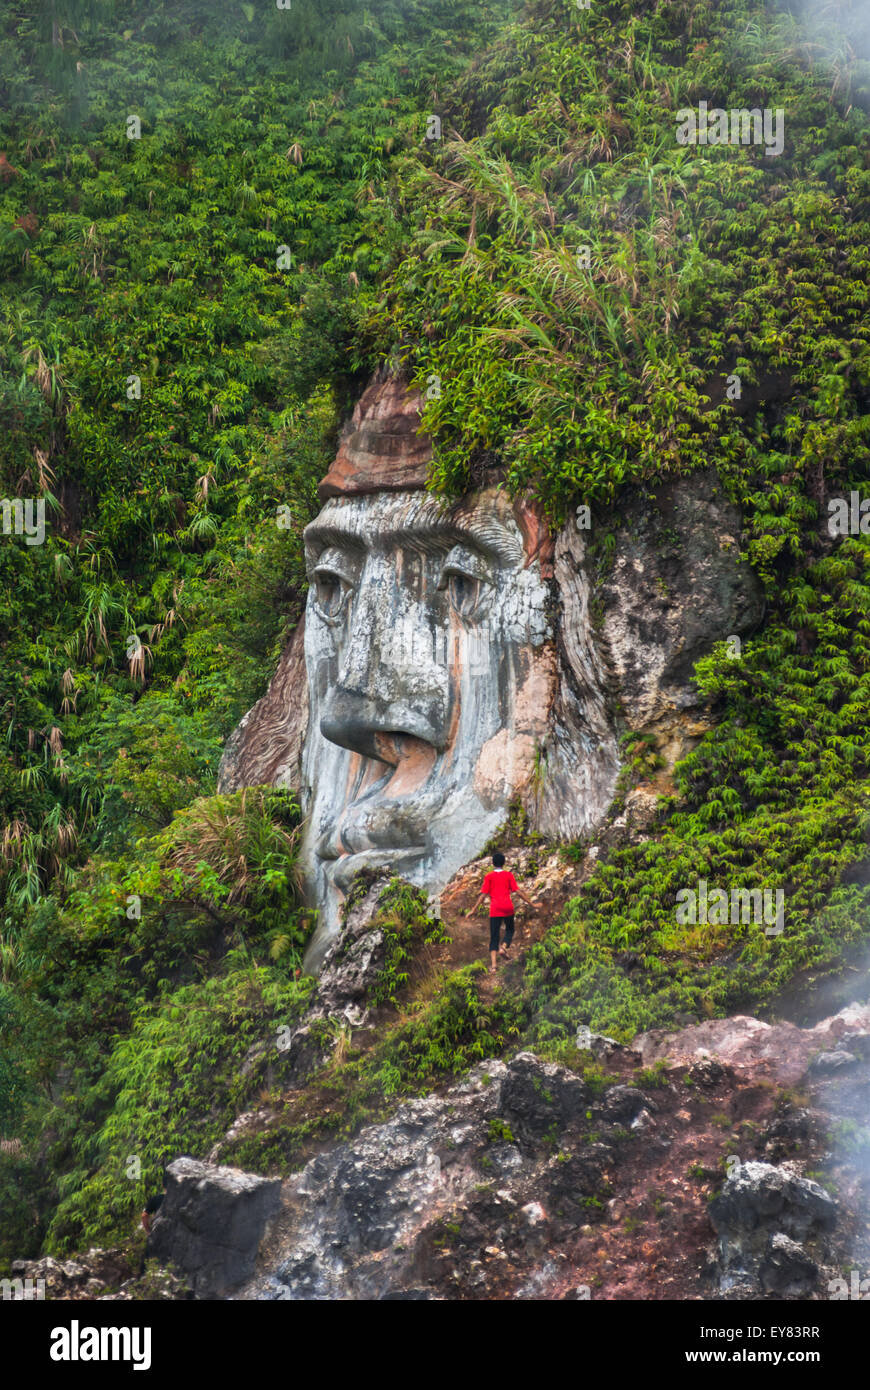 A visitor is spotted near a giant face formation illustrating the character of Toar (ancestral figure) at Bukit Kasih in North Sulawesi, Indonesia. Stock Photo